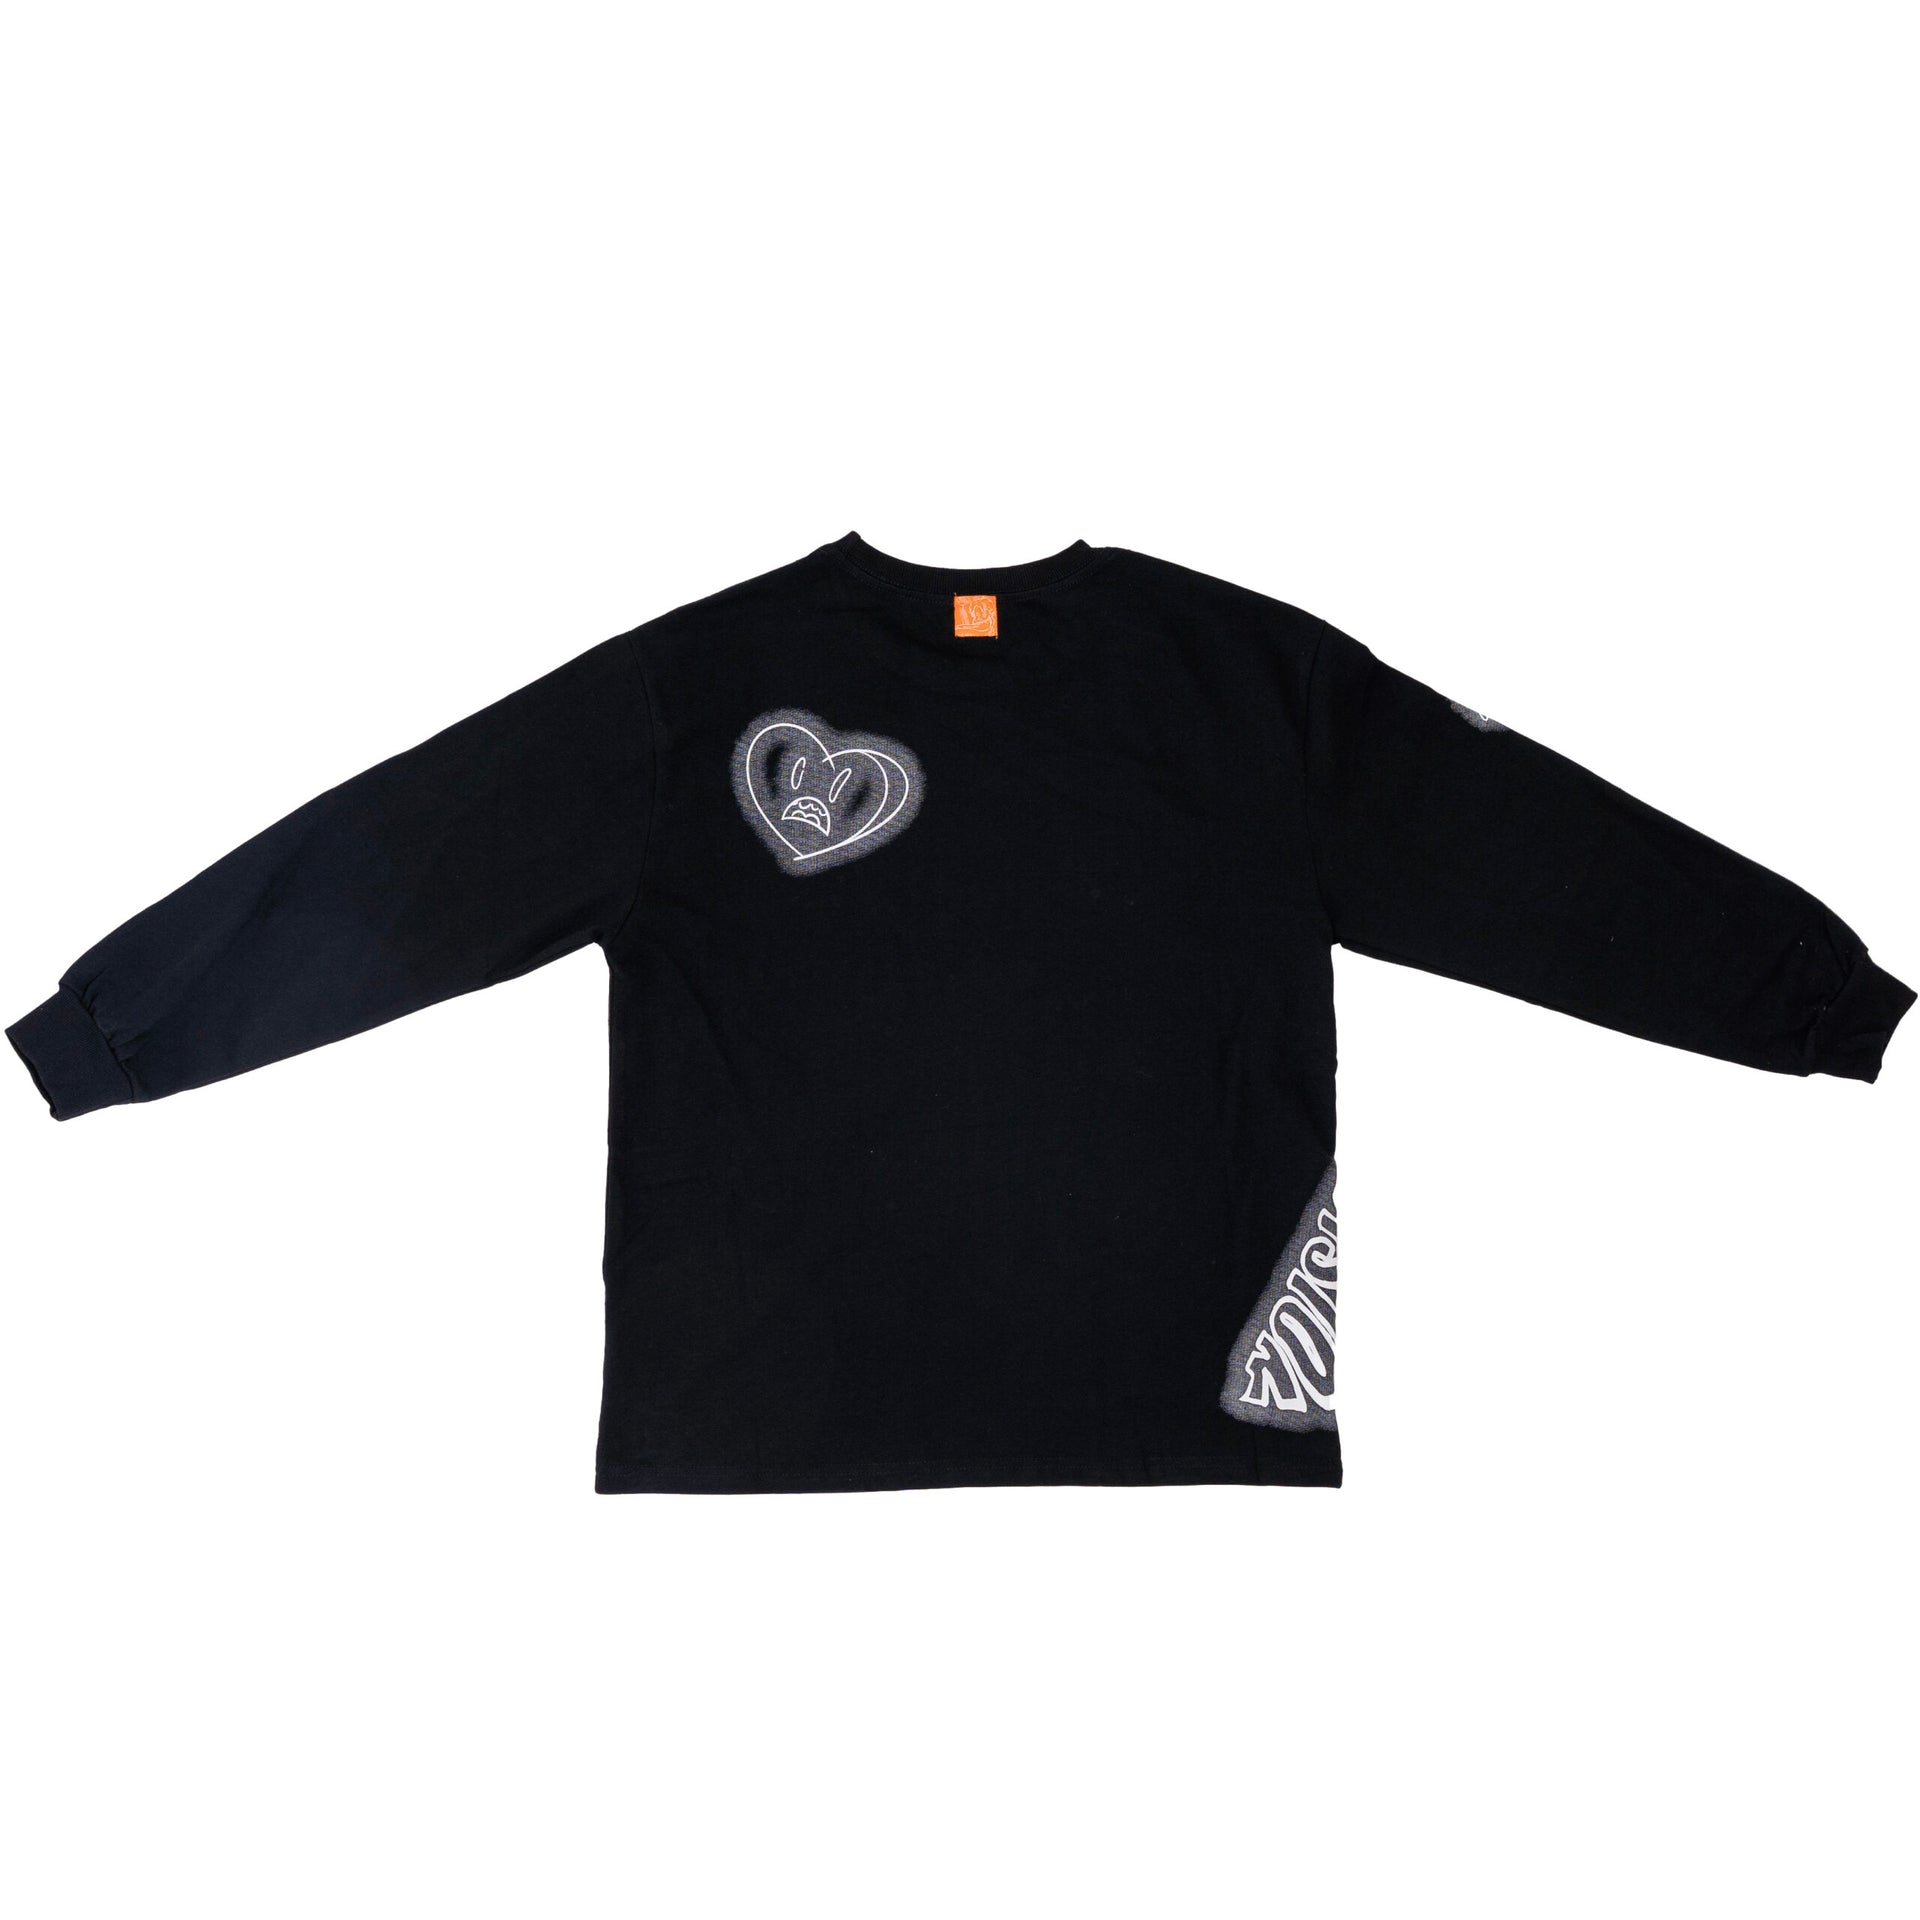 Ghosted L/S